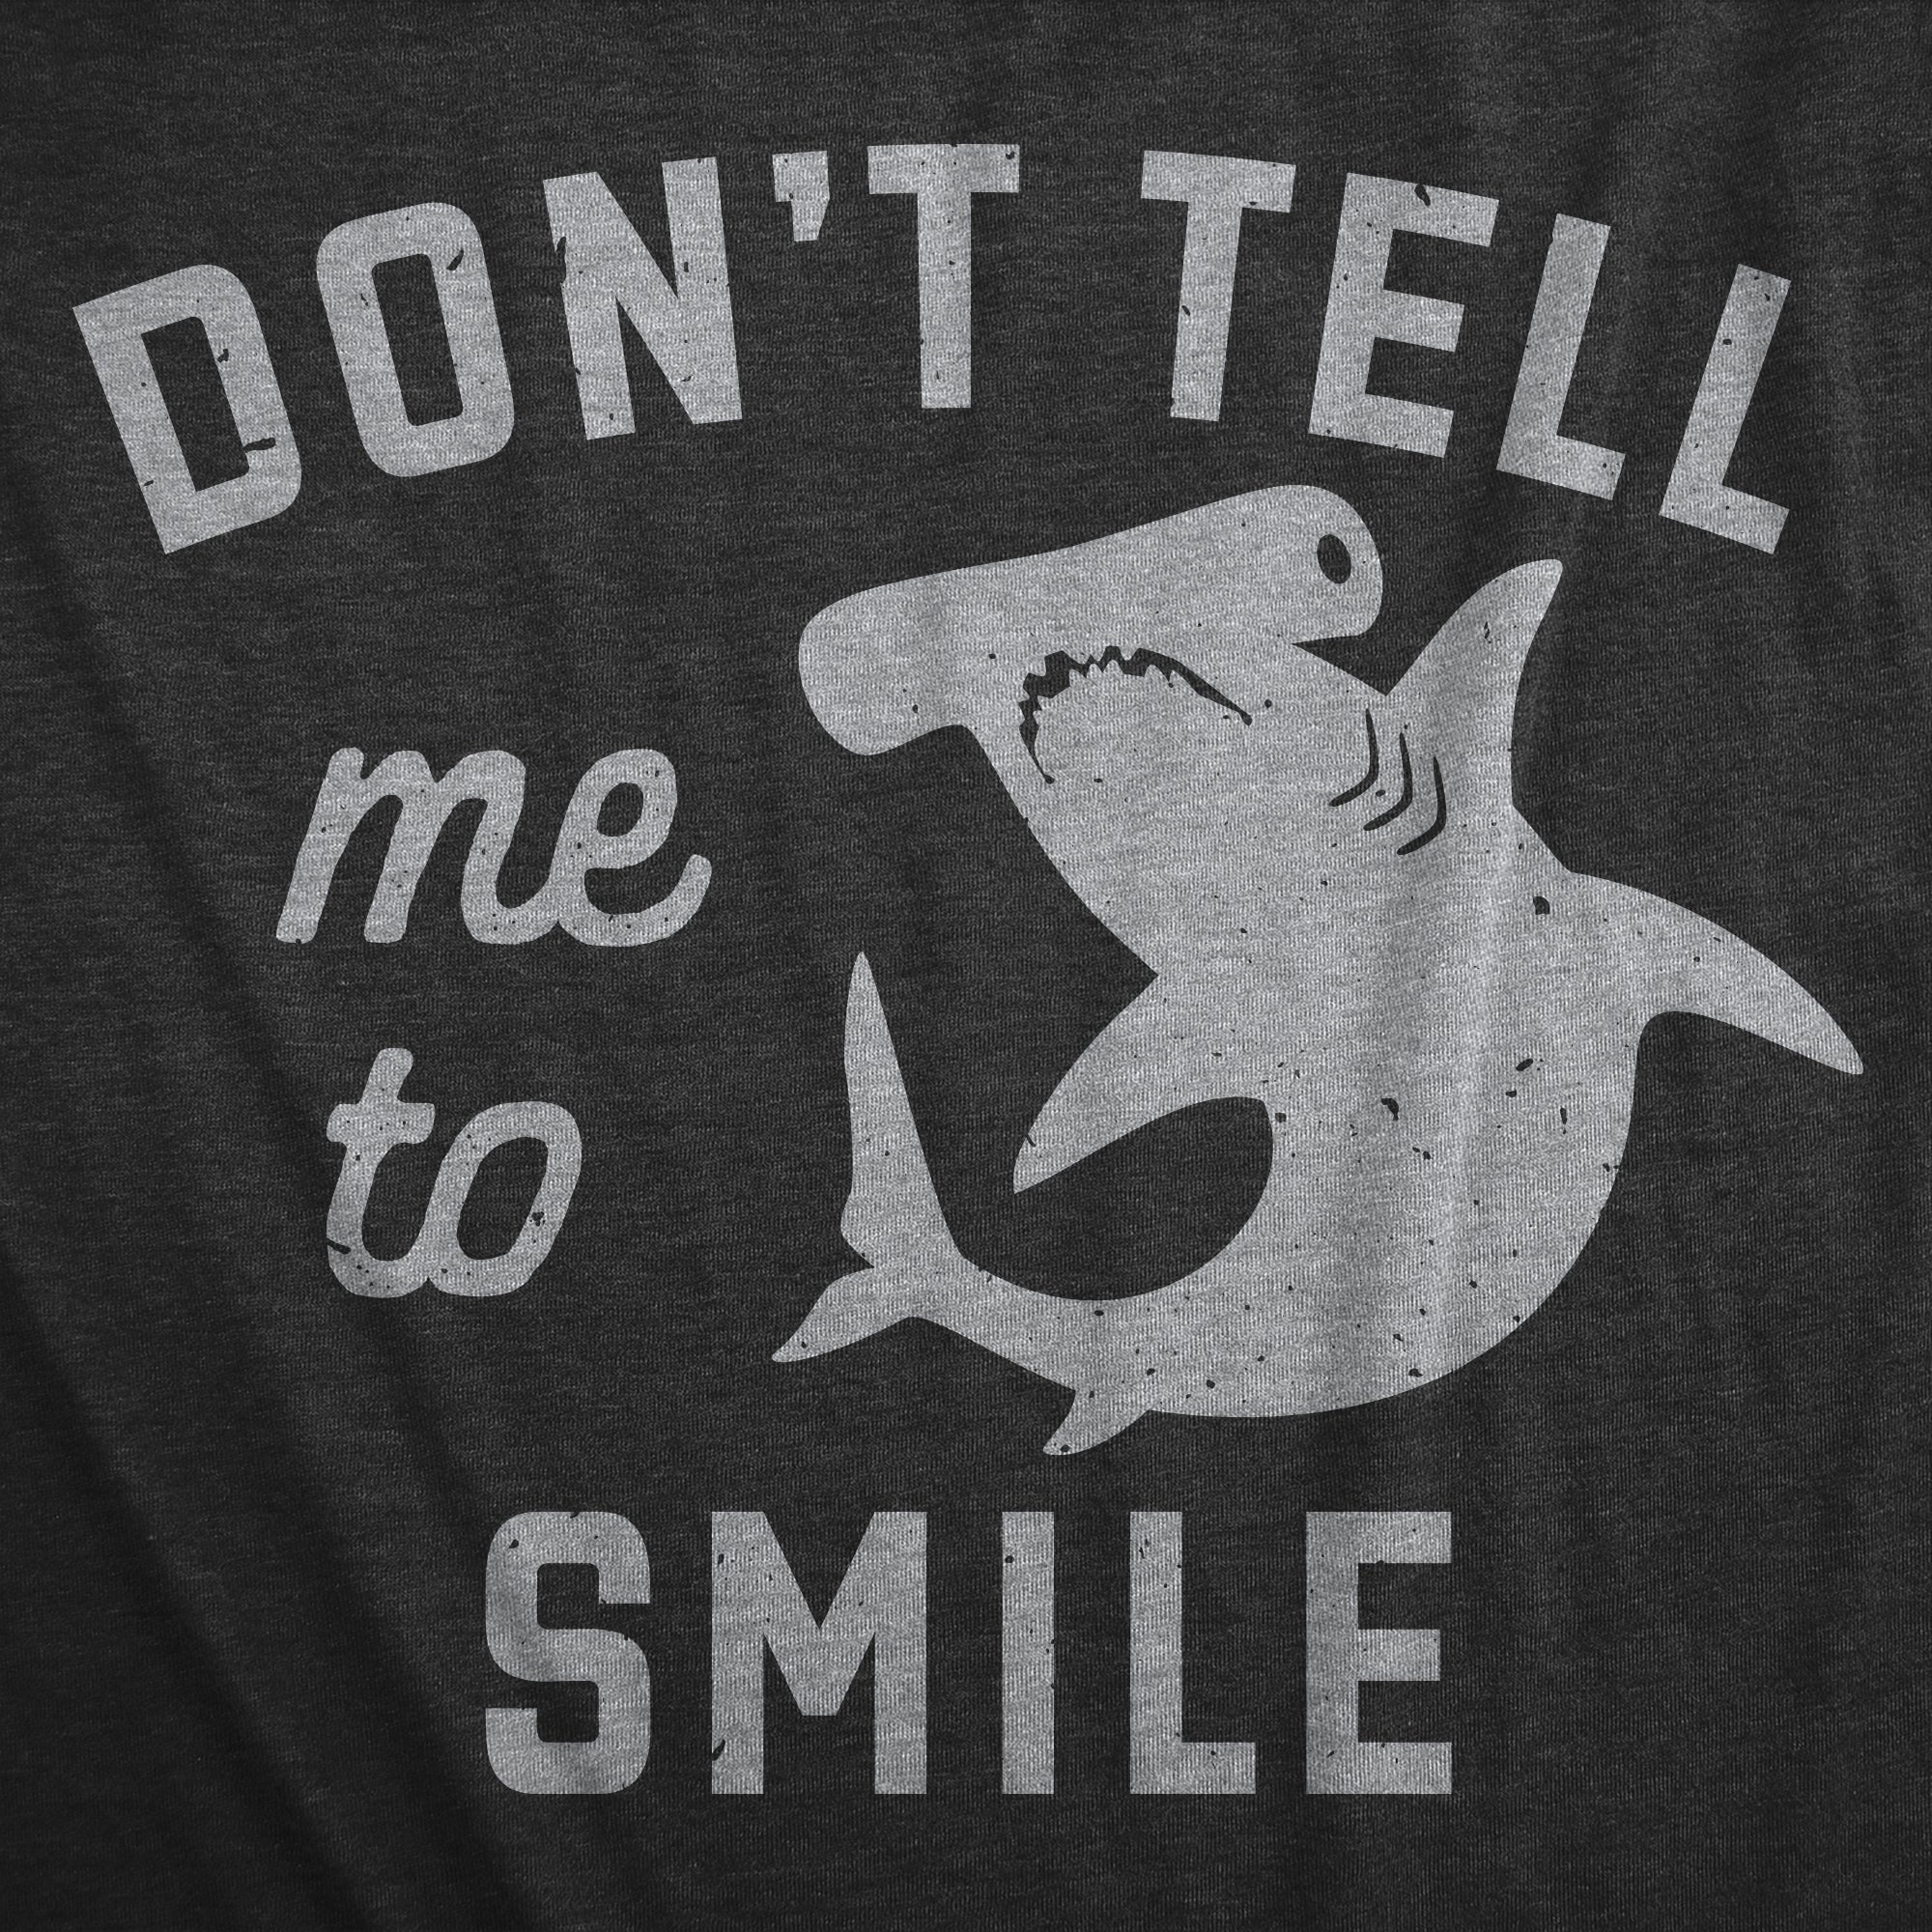 Funny Heather Black - SMILE Dont Tell Me To Smile Womens T Shirt Nerdy Shark Week Sarcastic Tee